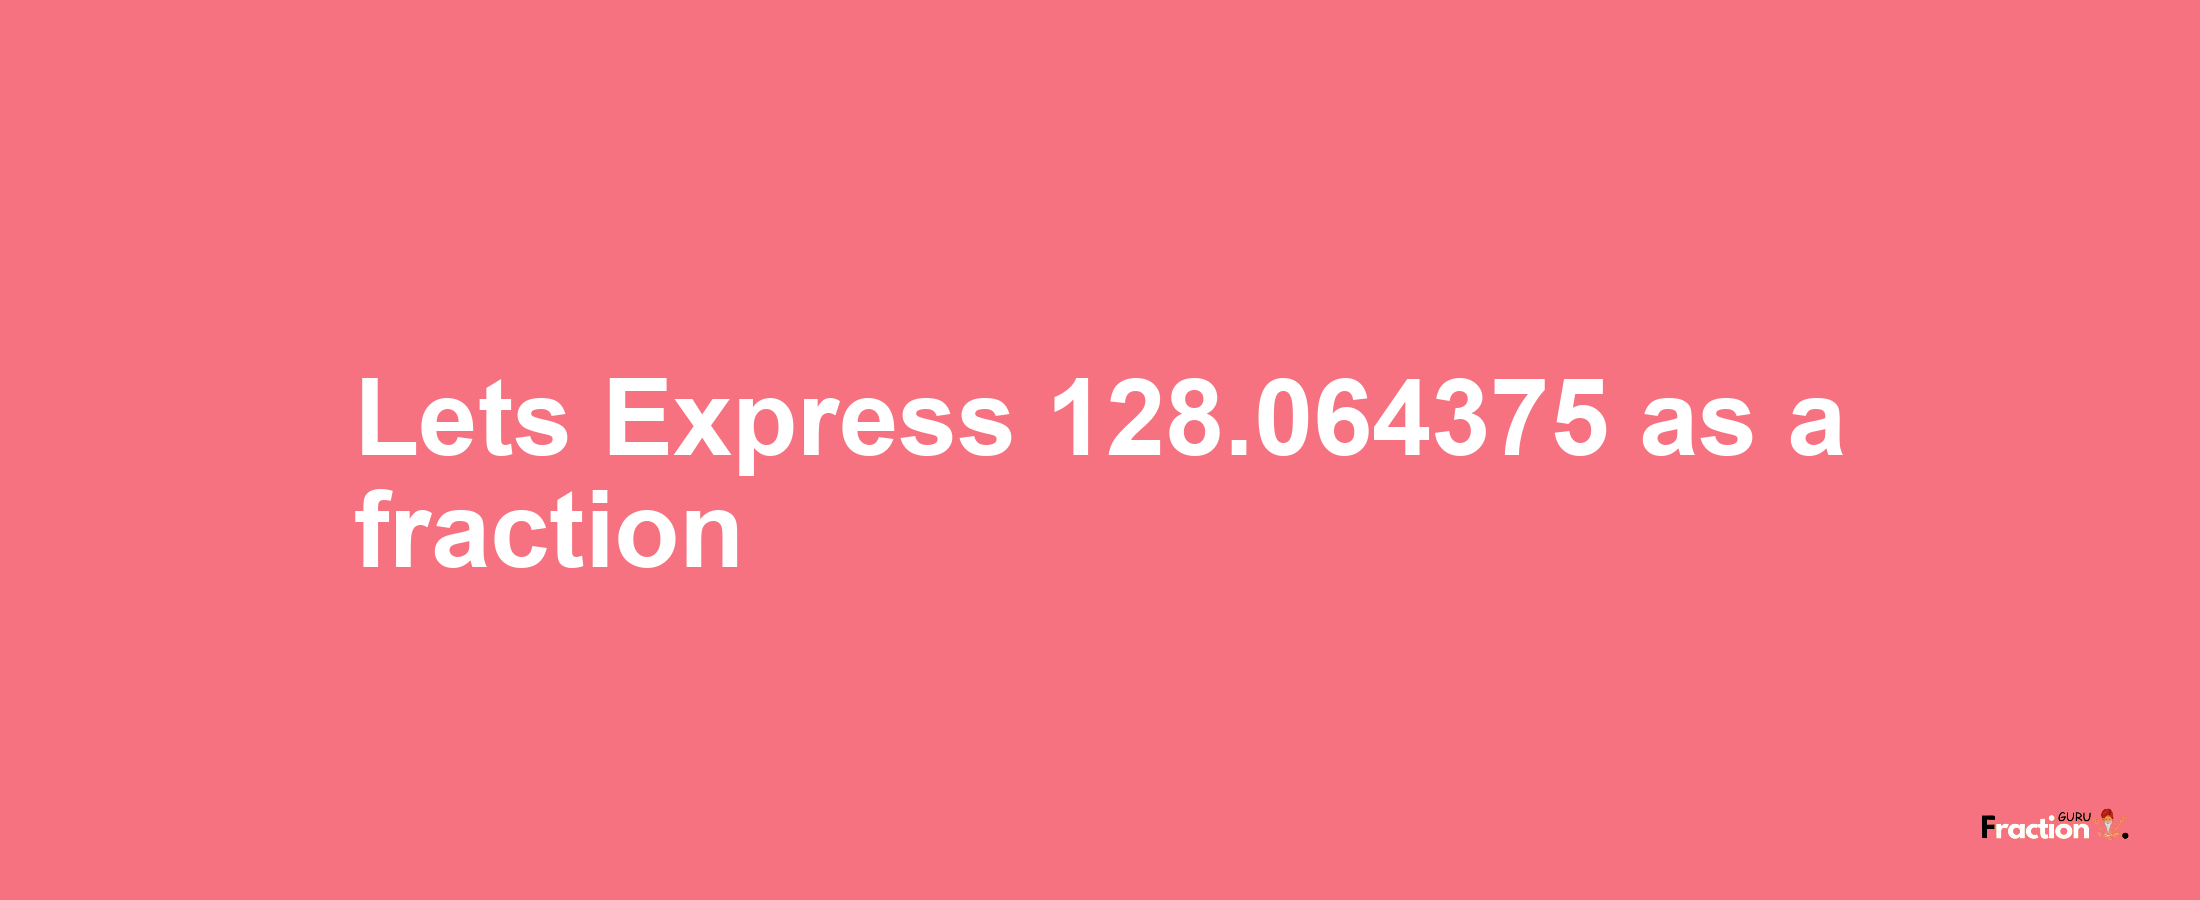 Lets Express 128.064375 as afraction